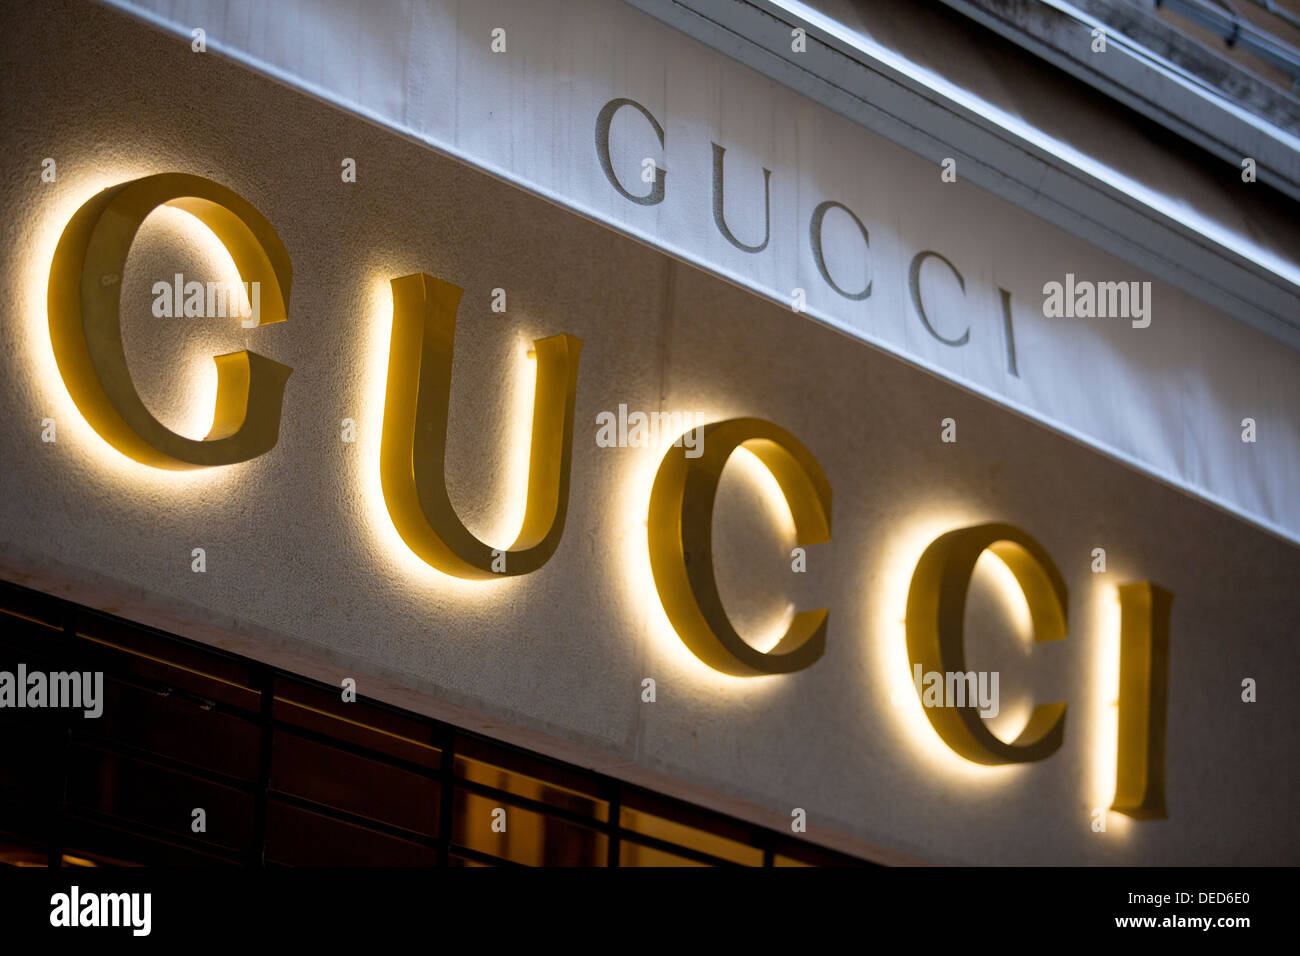 GUCCI, STORE FRONT. VENICE, ITALY Stock Photo, Royalty Free Image: 60526760 - Alamy